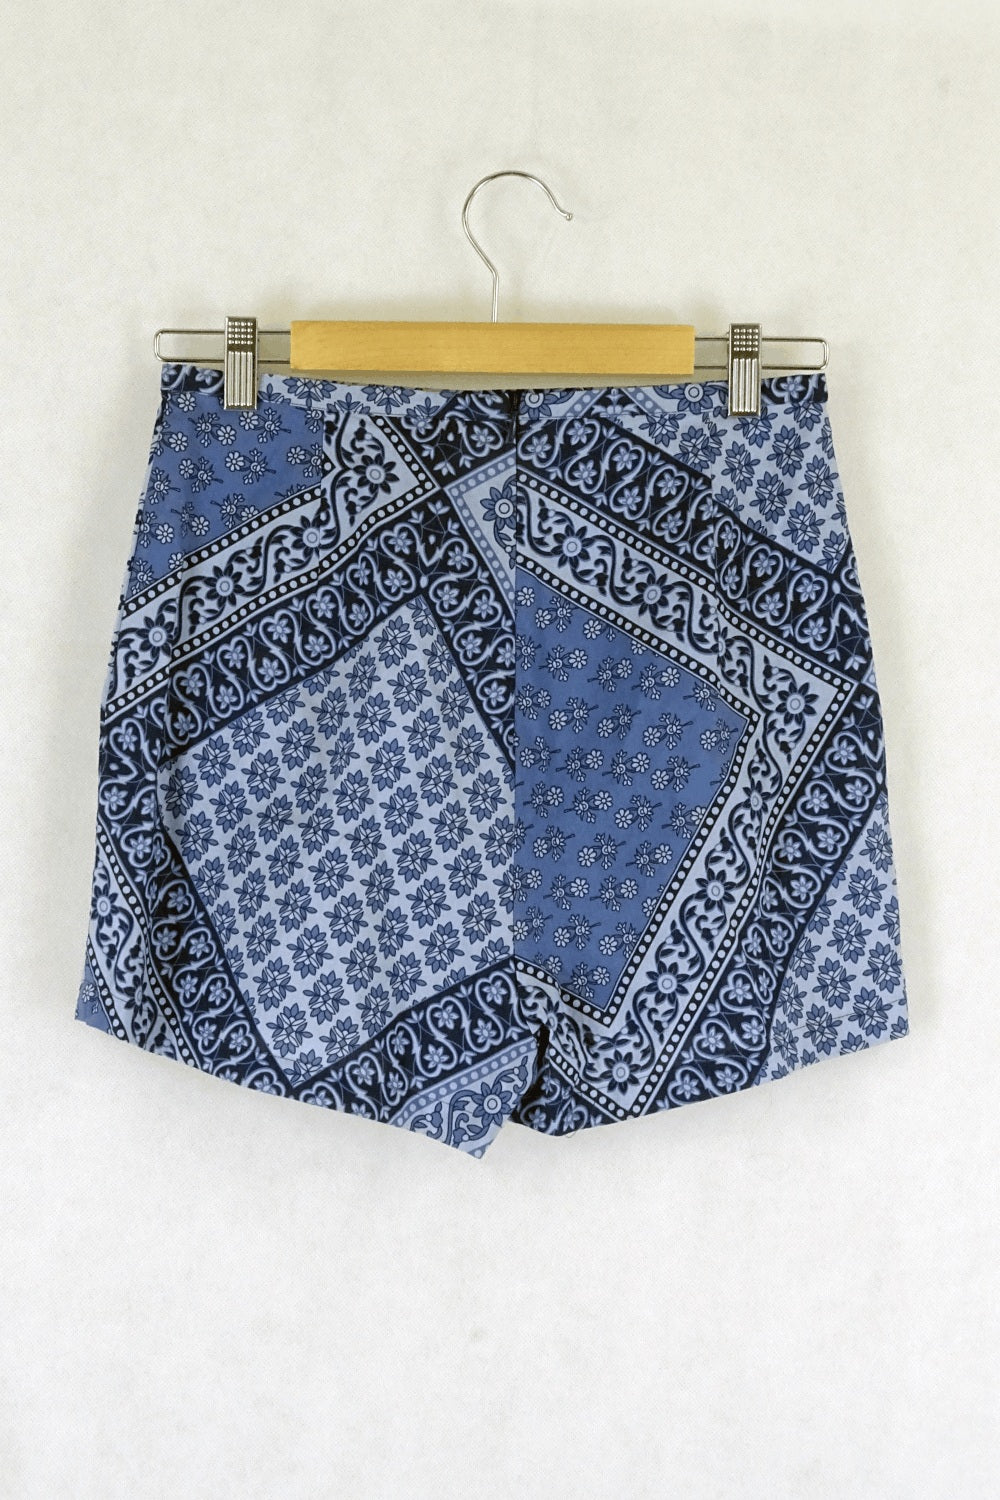 Lee Cotton High Waisted Shorts 10